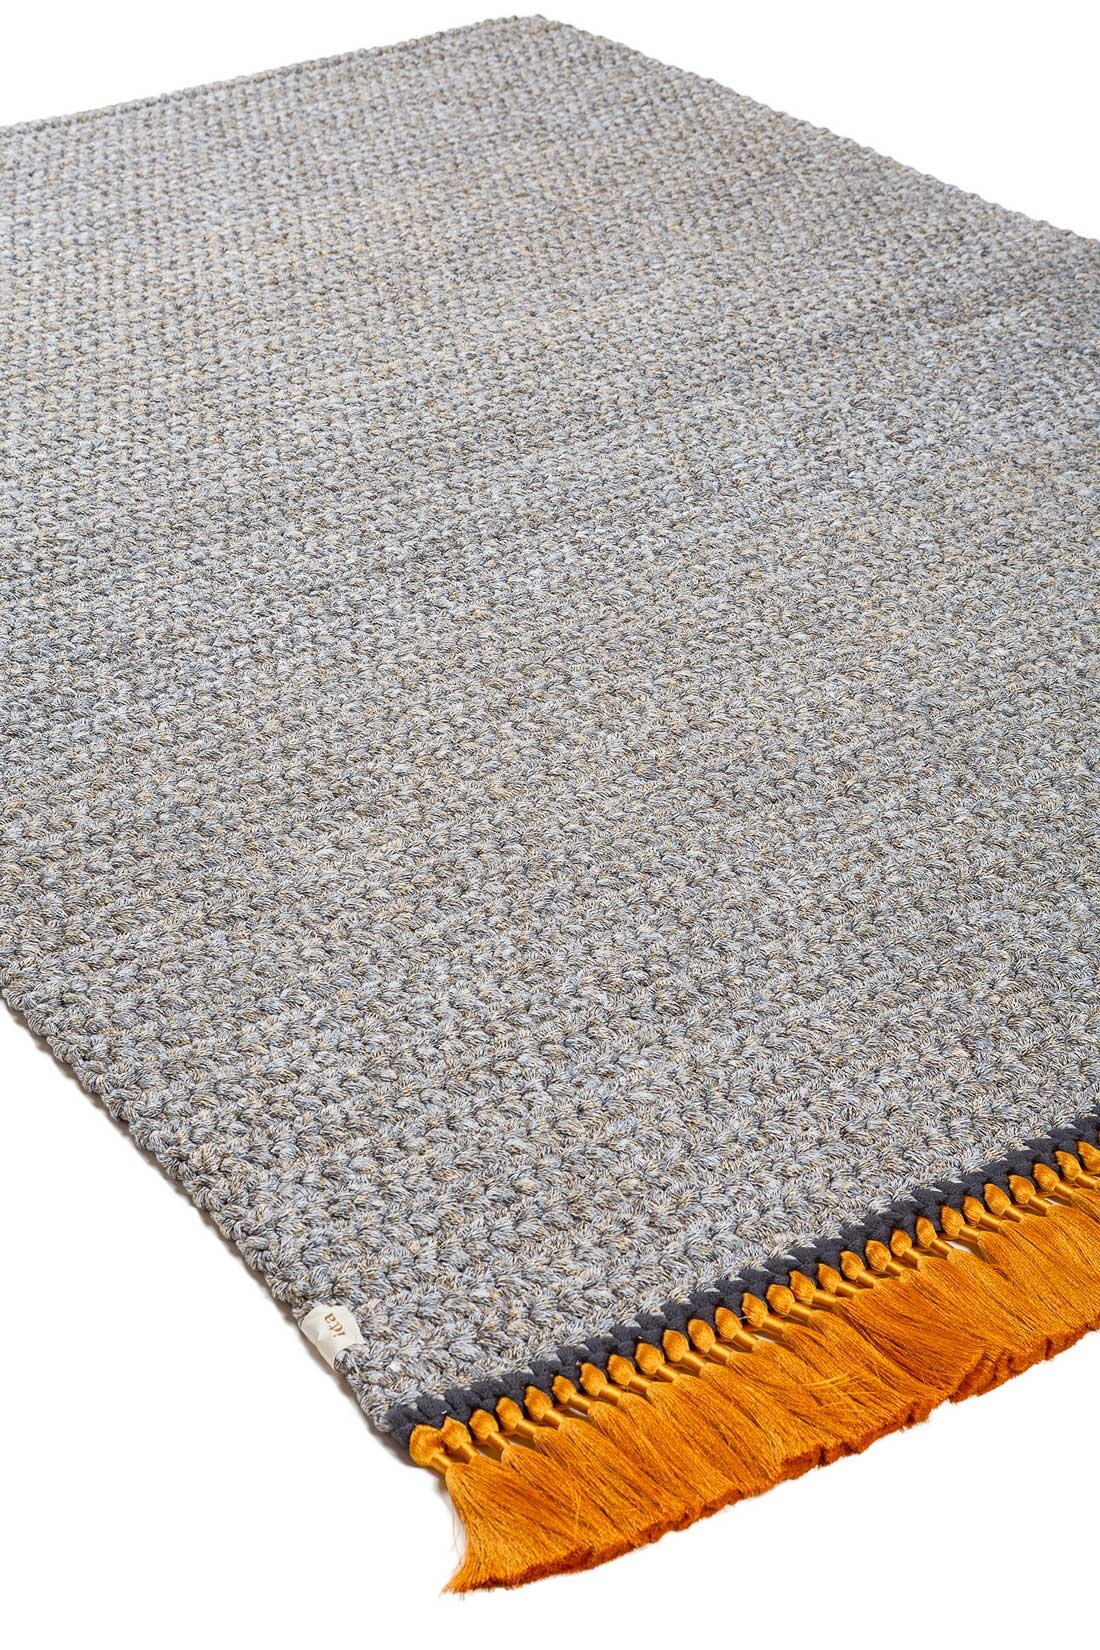 Hand-Crafted Handmade Crochet Thick Rug in Grey Beige Golden Made of Cotton & Polyester For Sale